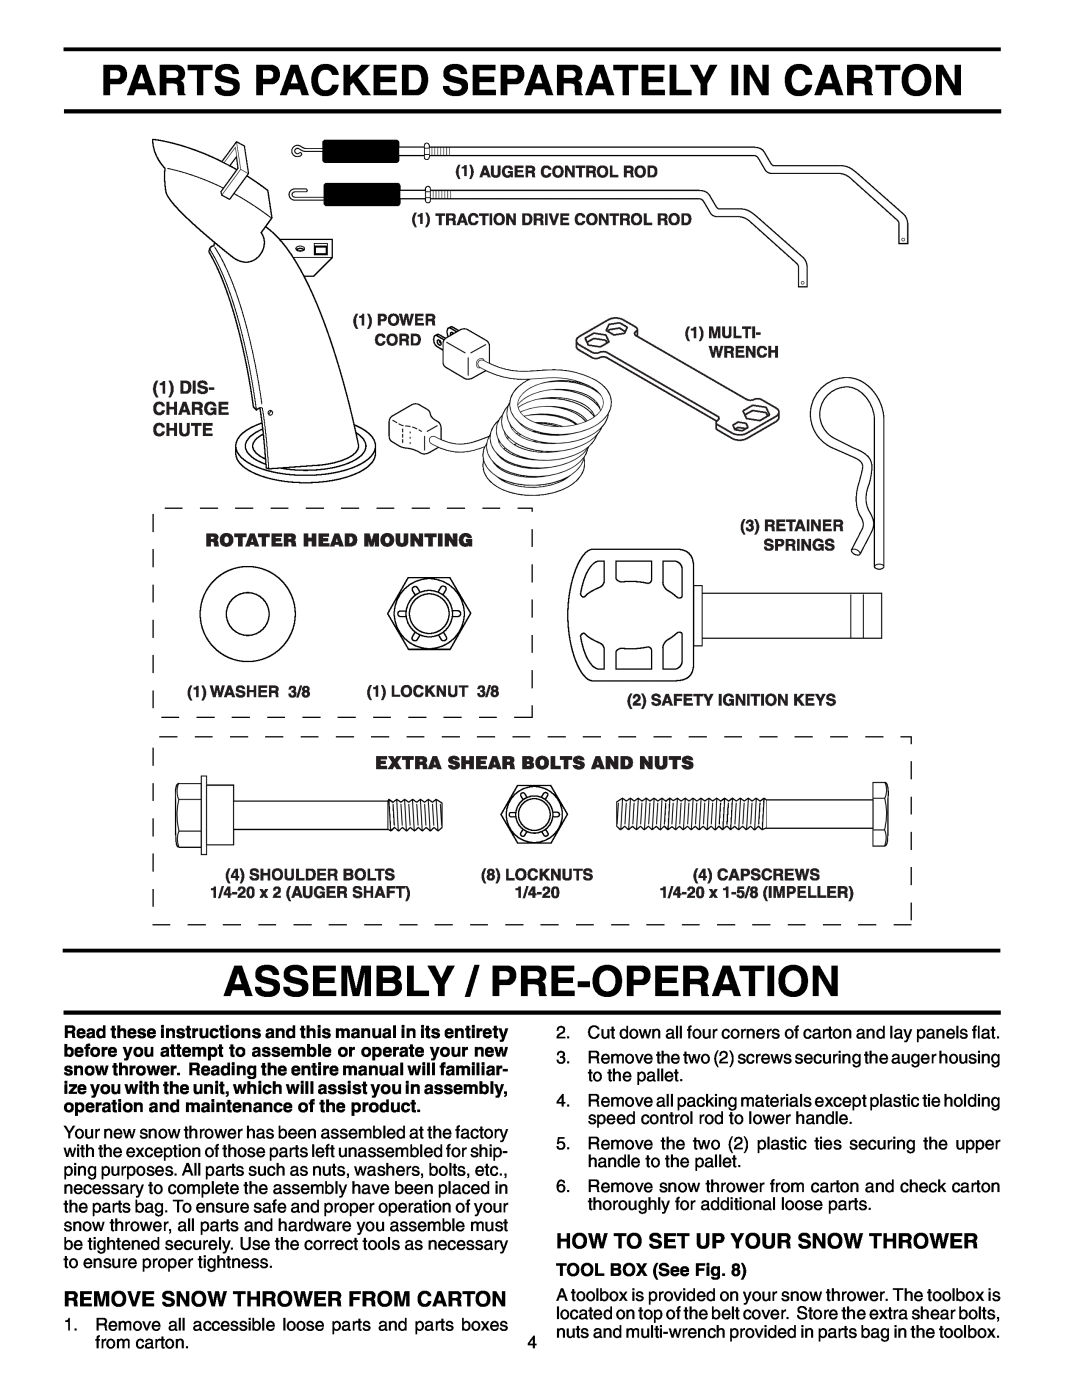 Poulan PR8527ES owner manual Parts Packed Separately In Carton, Assembly / Pre-Operation, How To Set Up Your Snow Thrower 